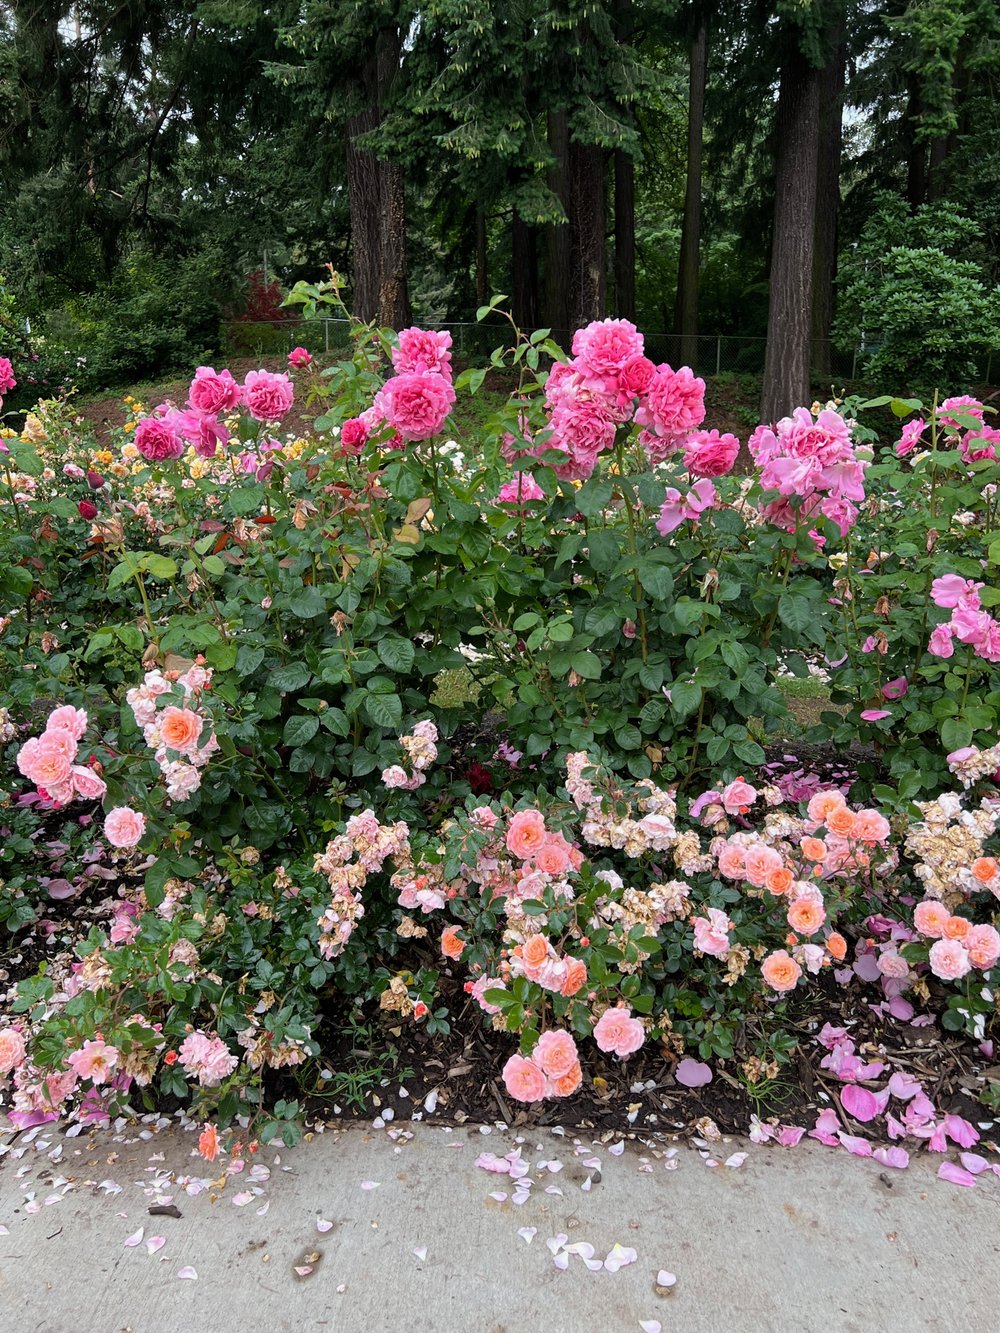 rose-small and shrub in summer.jpg